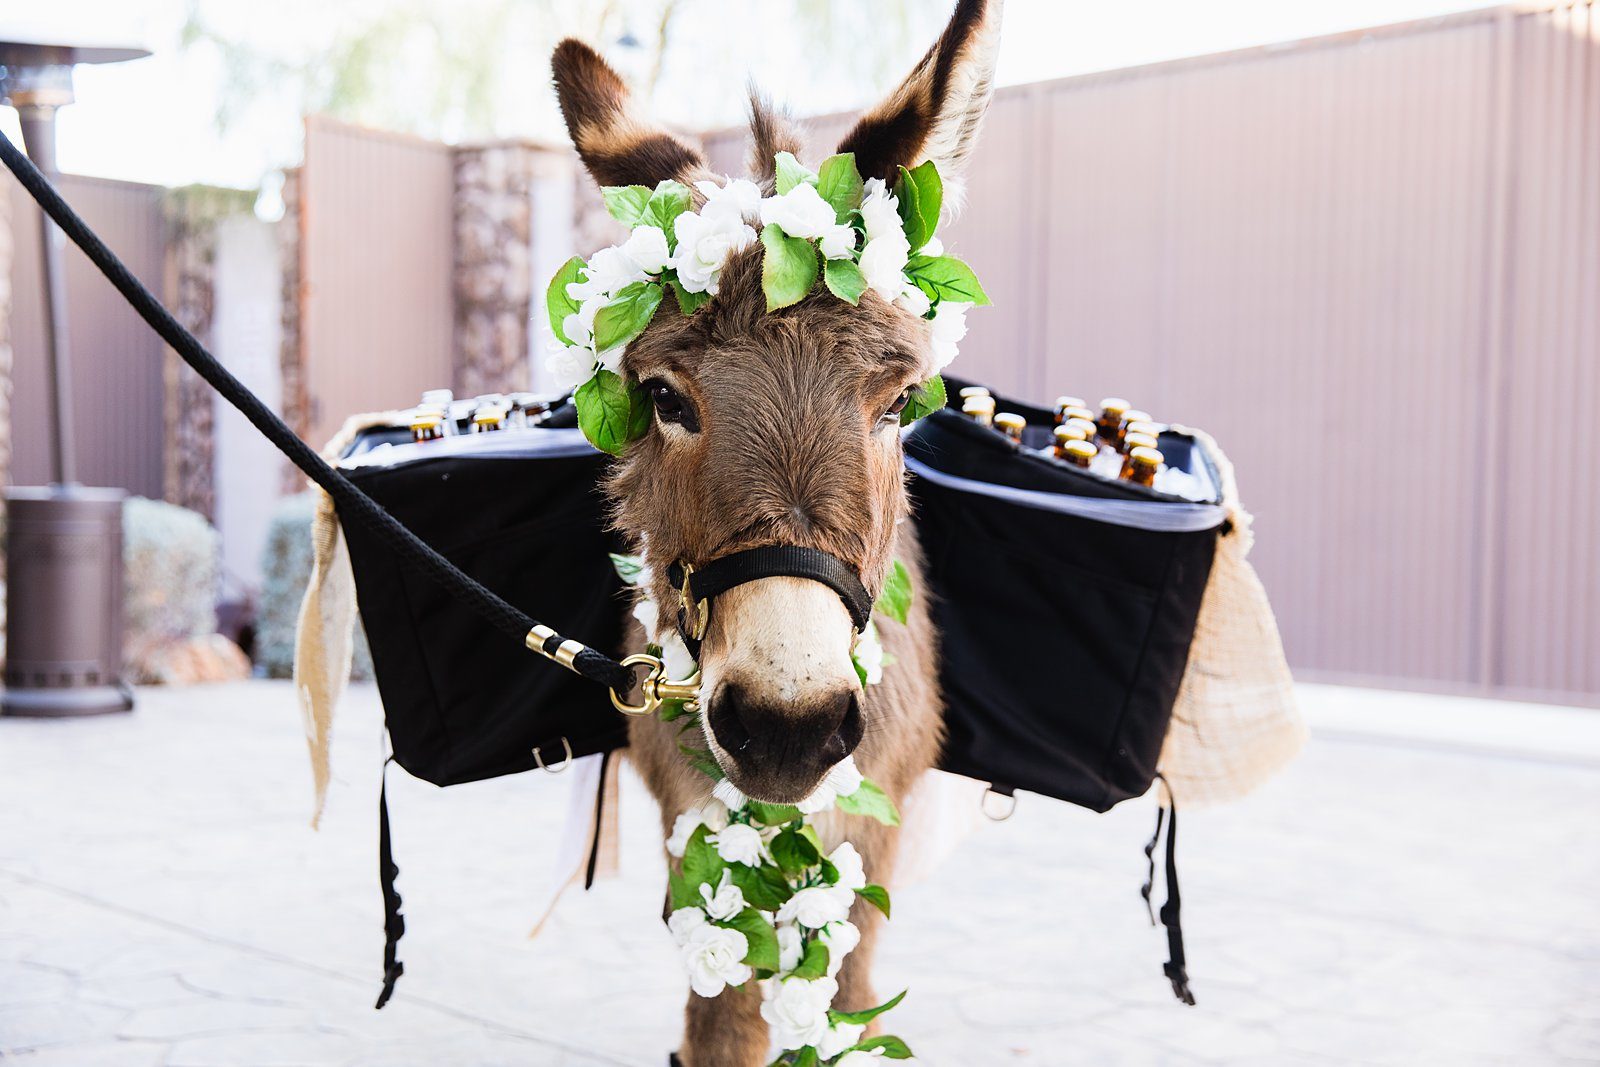 The beer burro decorated in flowers delivering beer to guests at cocktail hour by PMA Photography.